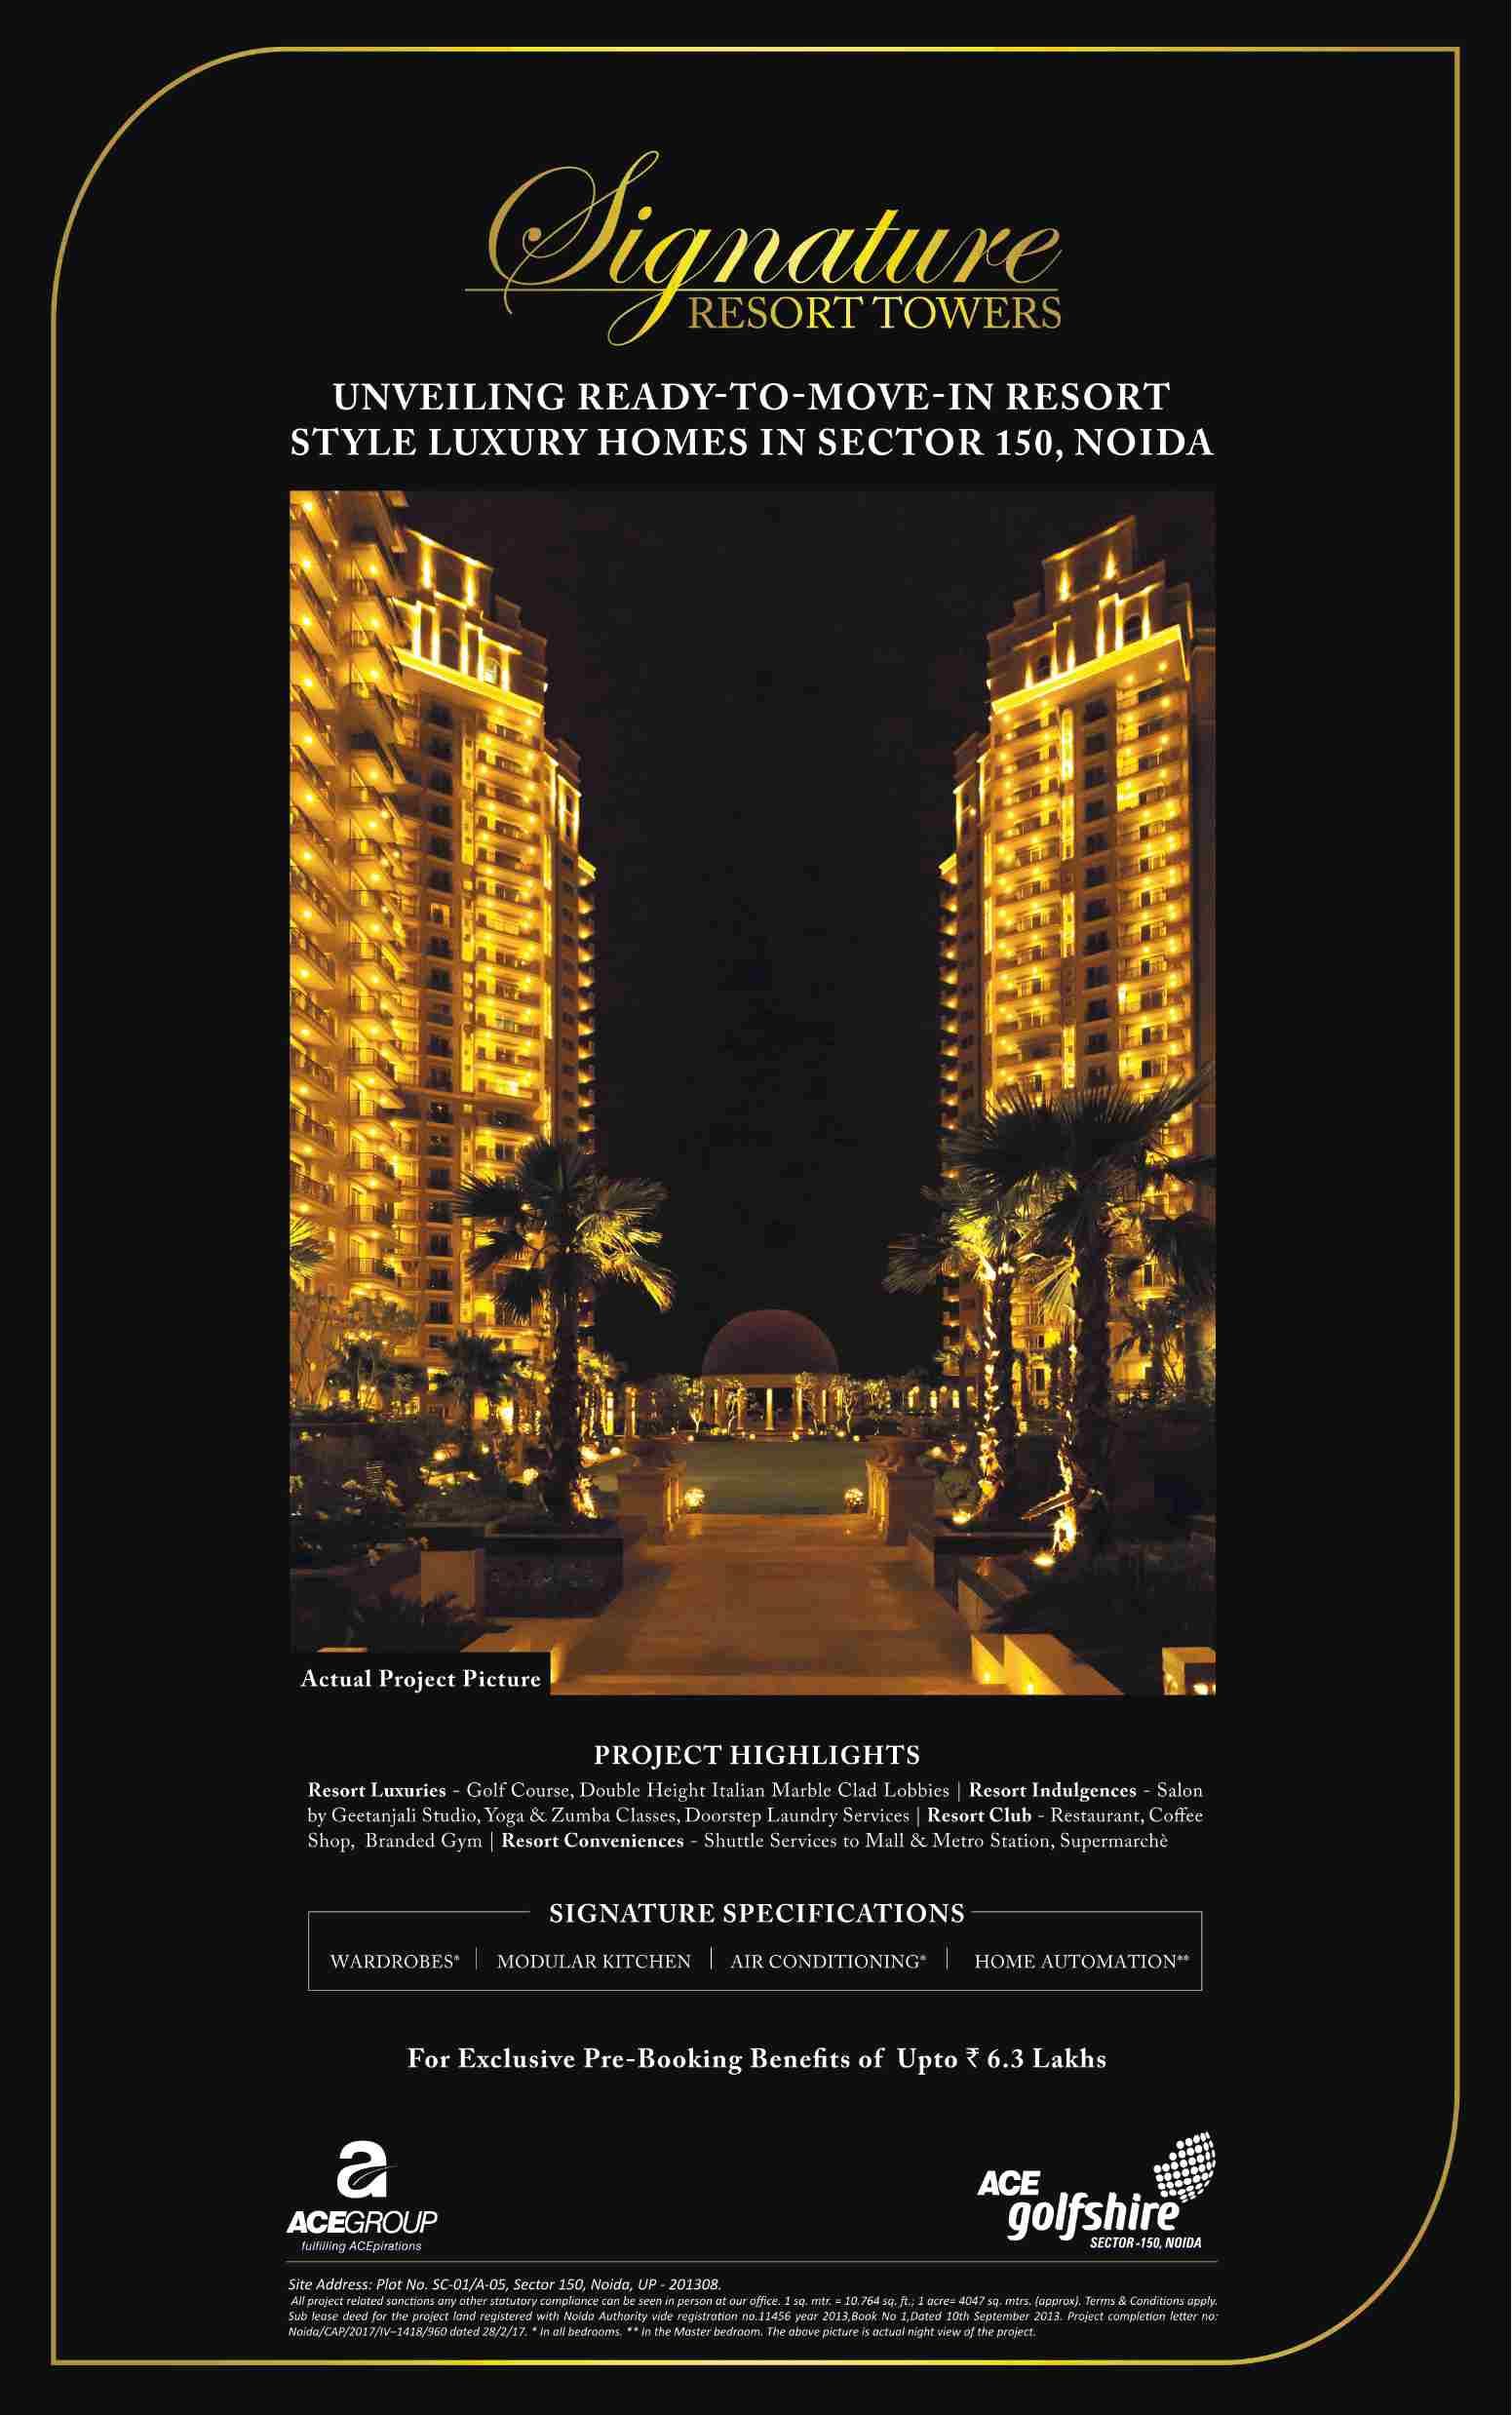 Signature Resort Towers coming soon at Ace Golfshire in Noida Update